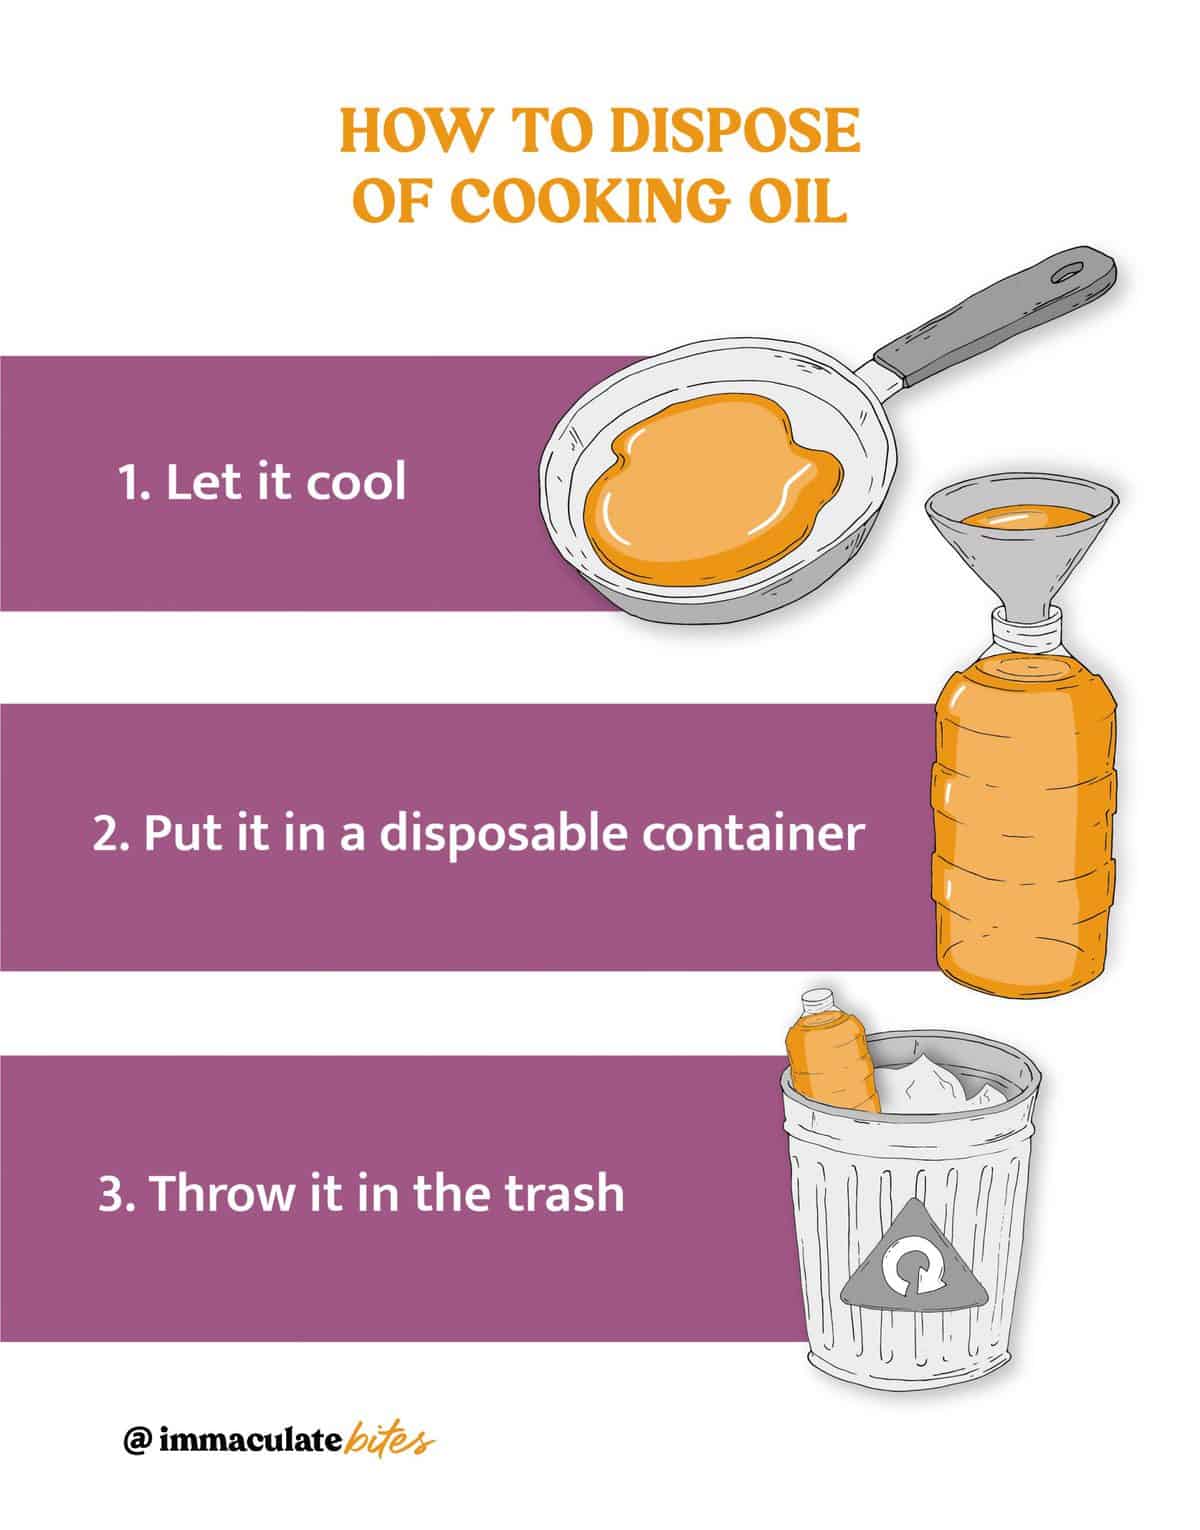 Properly Disposing of Cooking Oil/Grease